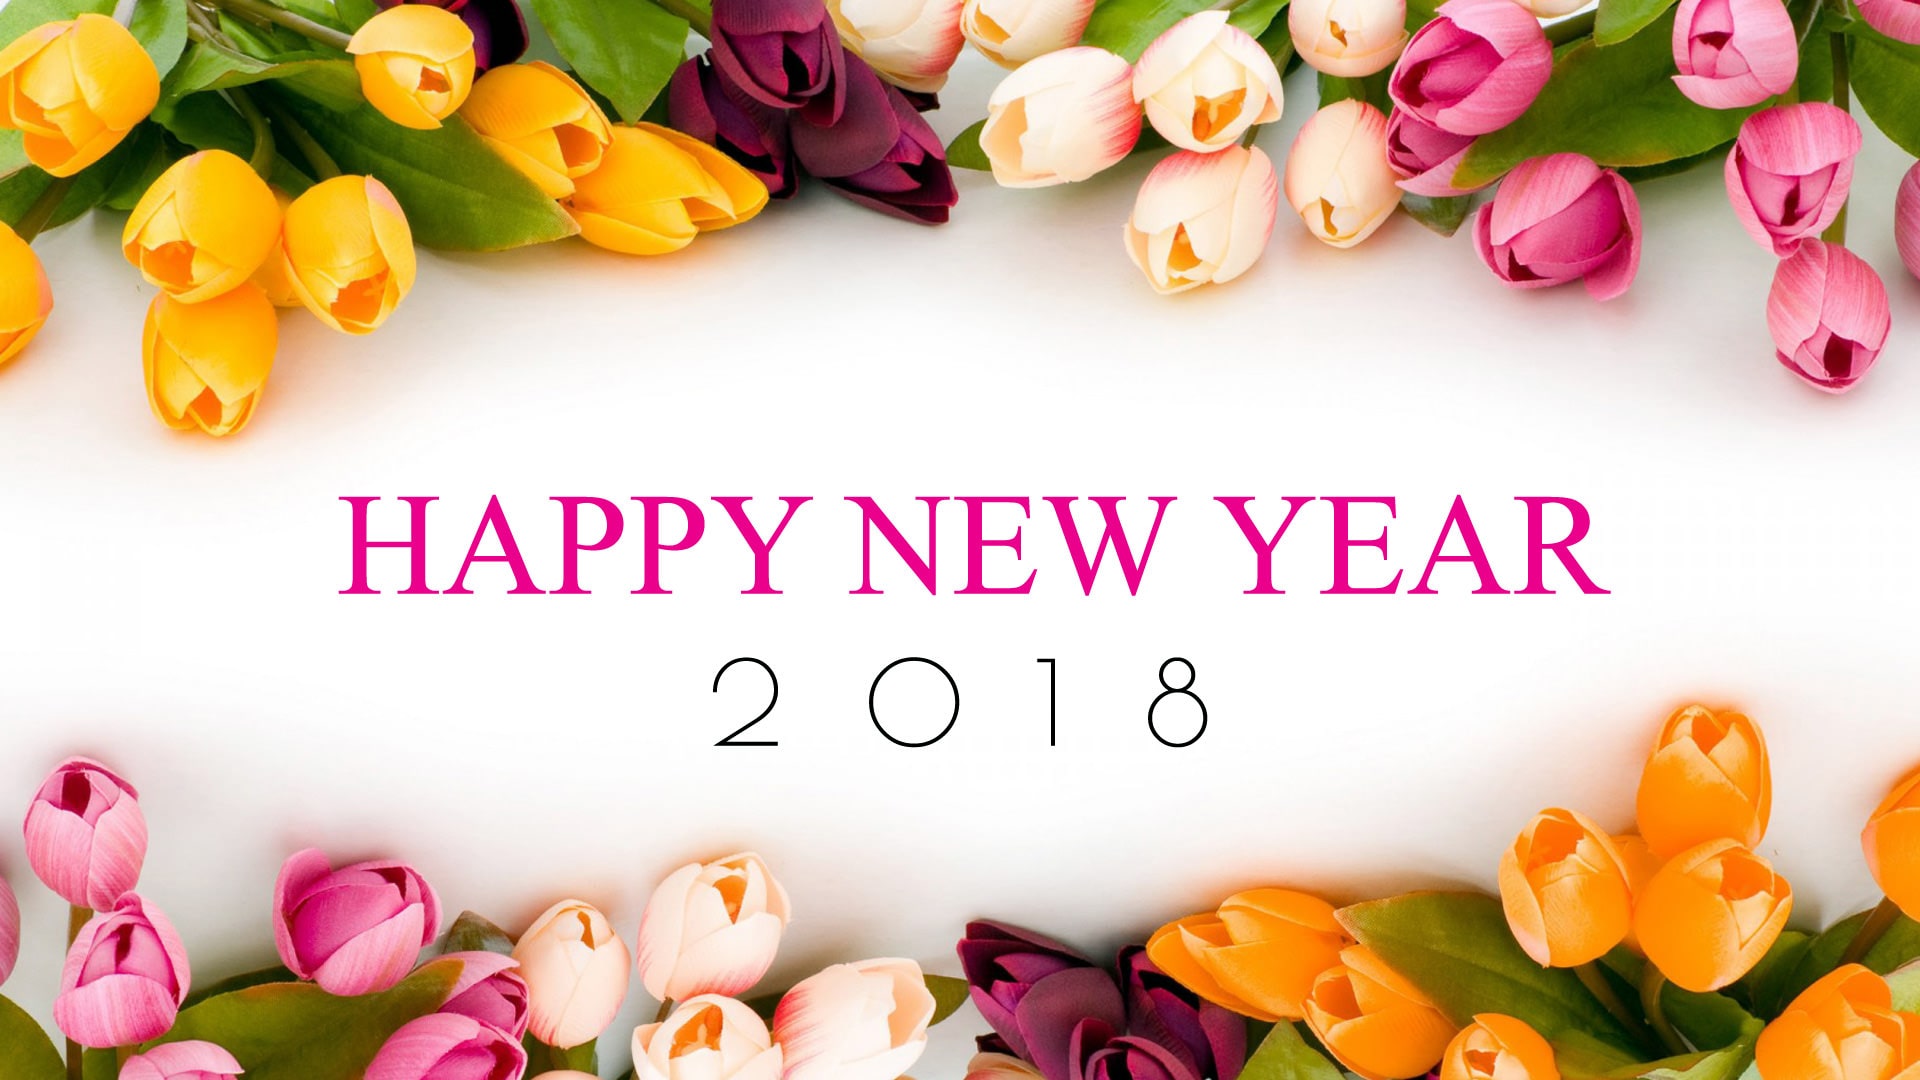 Happy New Year Wishes For Crush - New Year 2018 Flowers , HD Wallpaper & Backgrounds